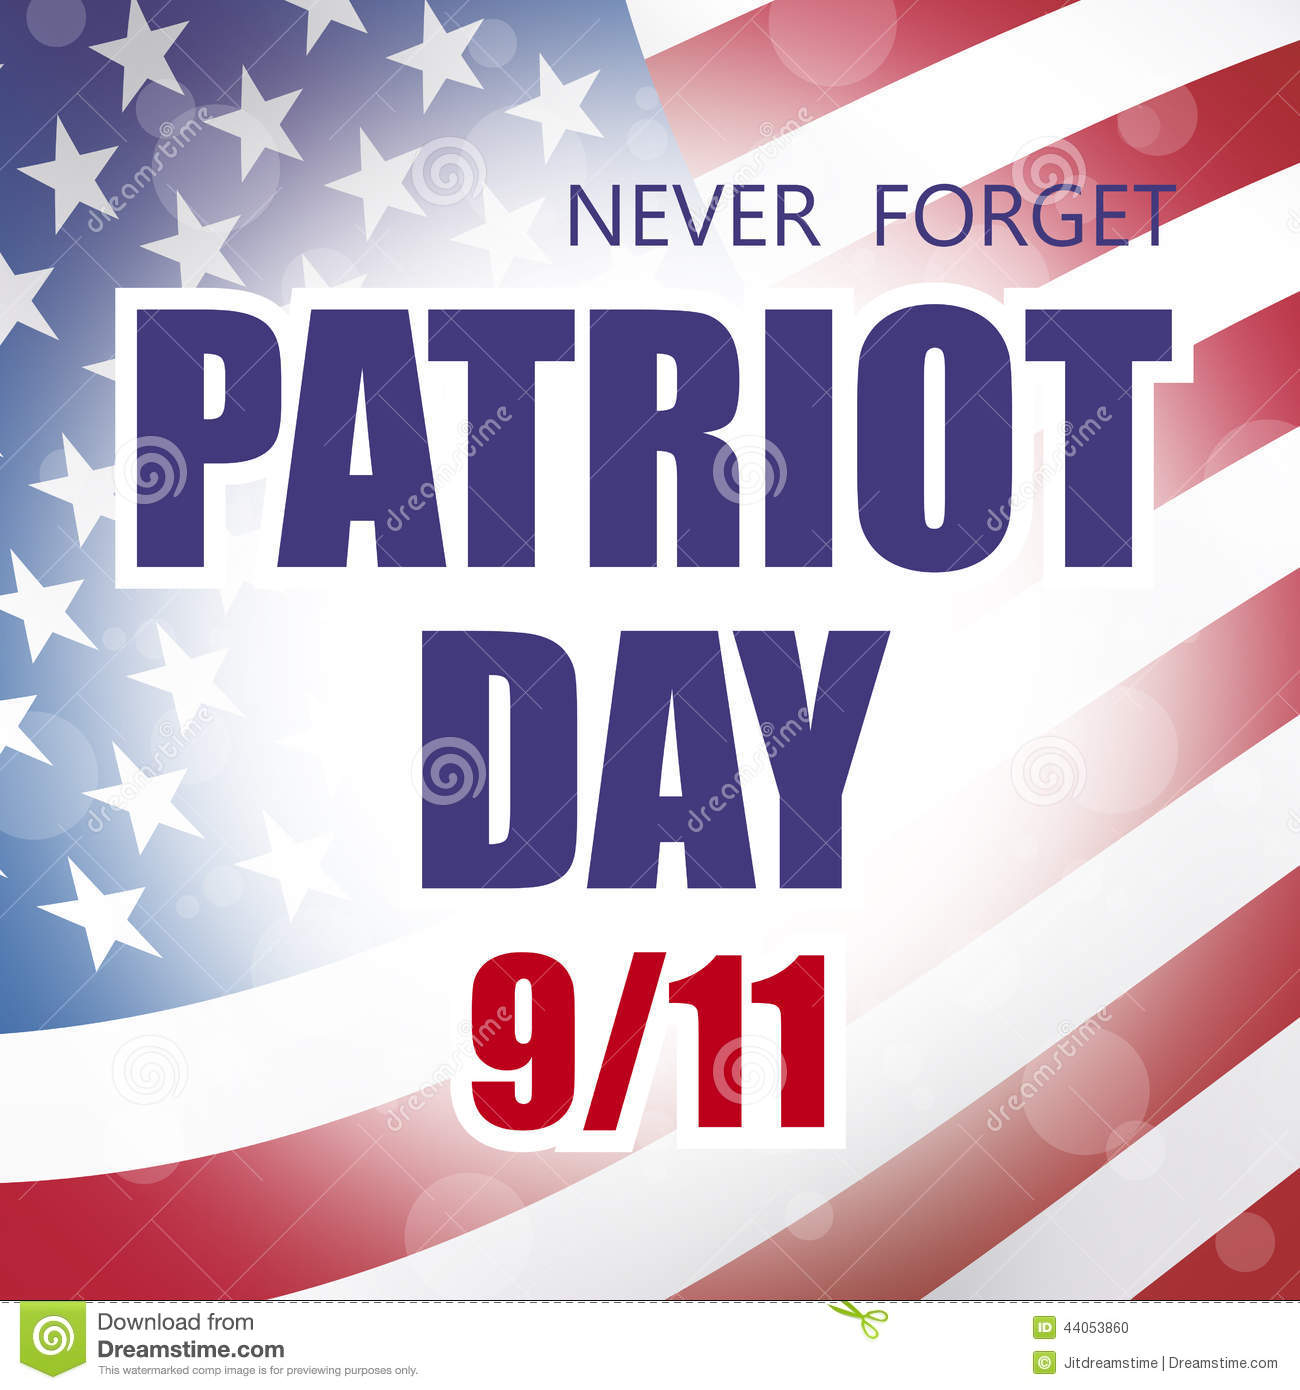 Patriot Day never forget USA